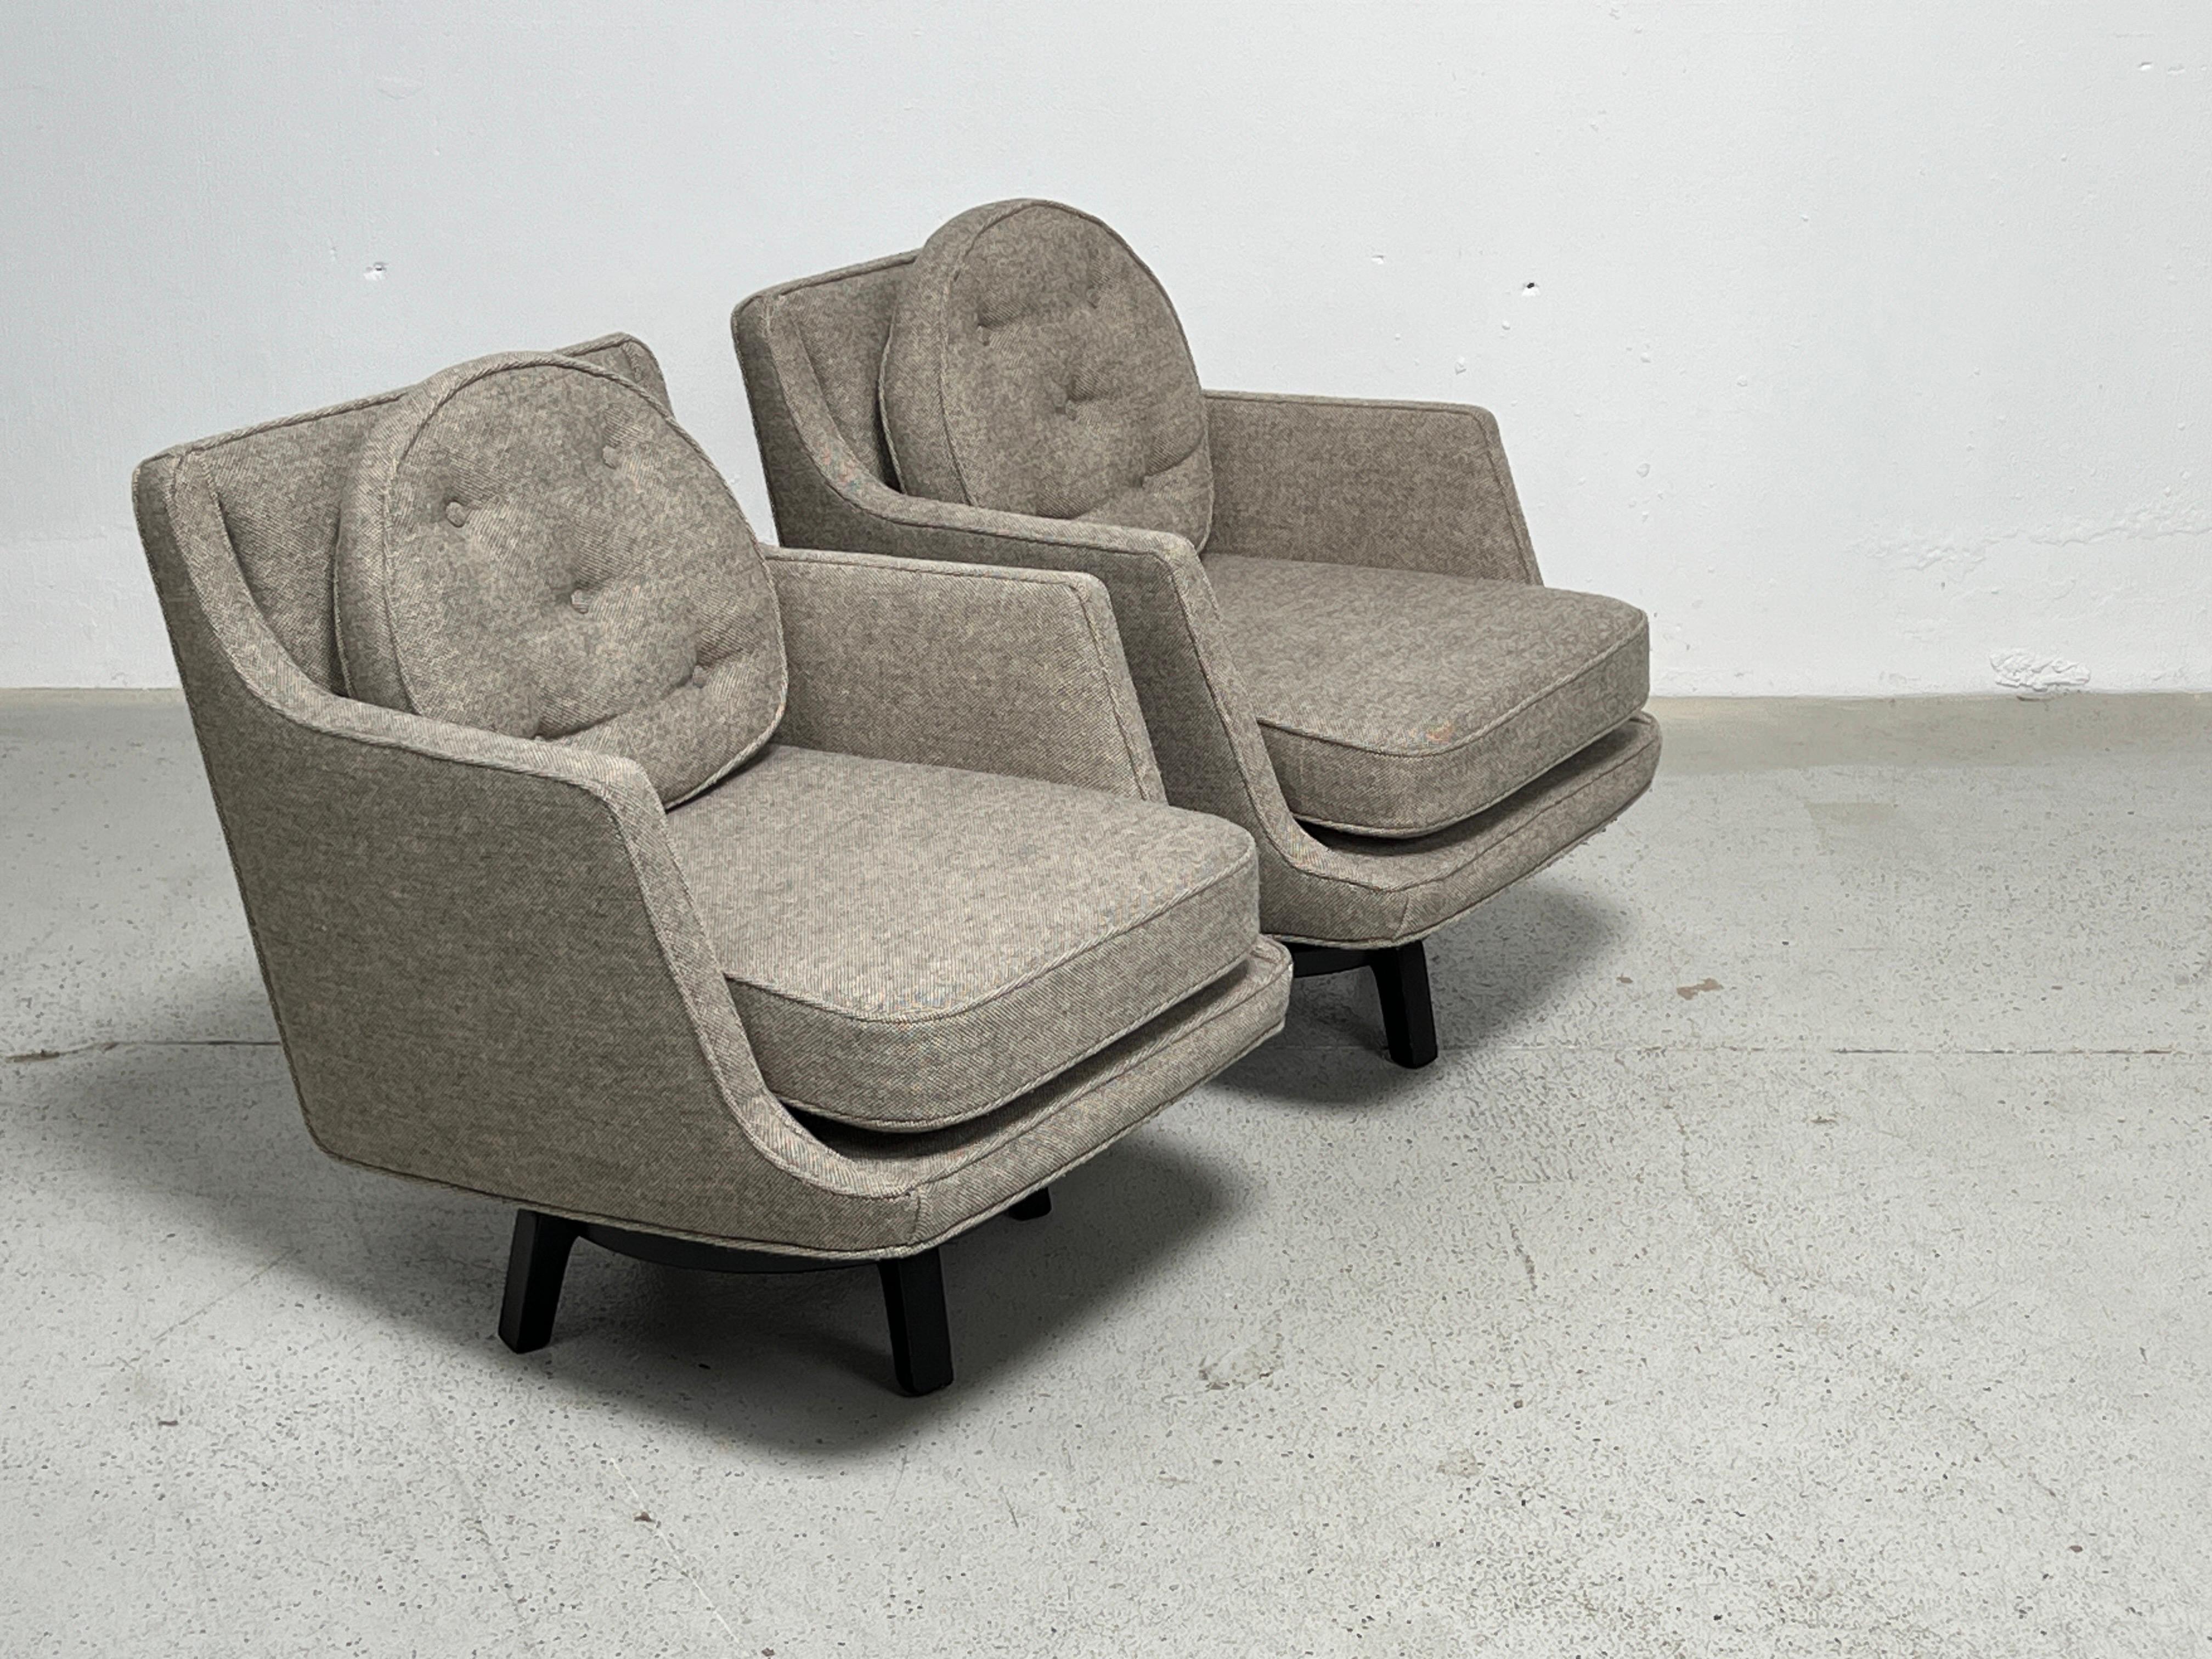 Pair of Swivel Chairs by Edward Wormley for Dunbar For Sale 3